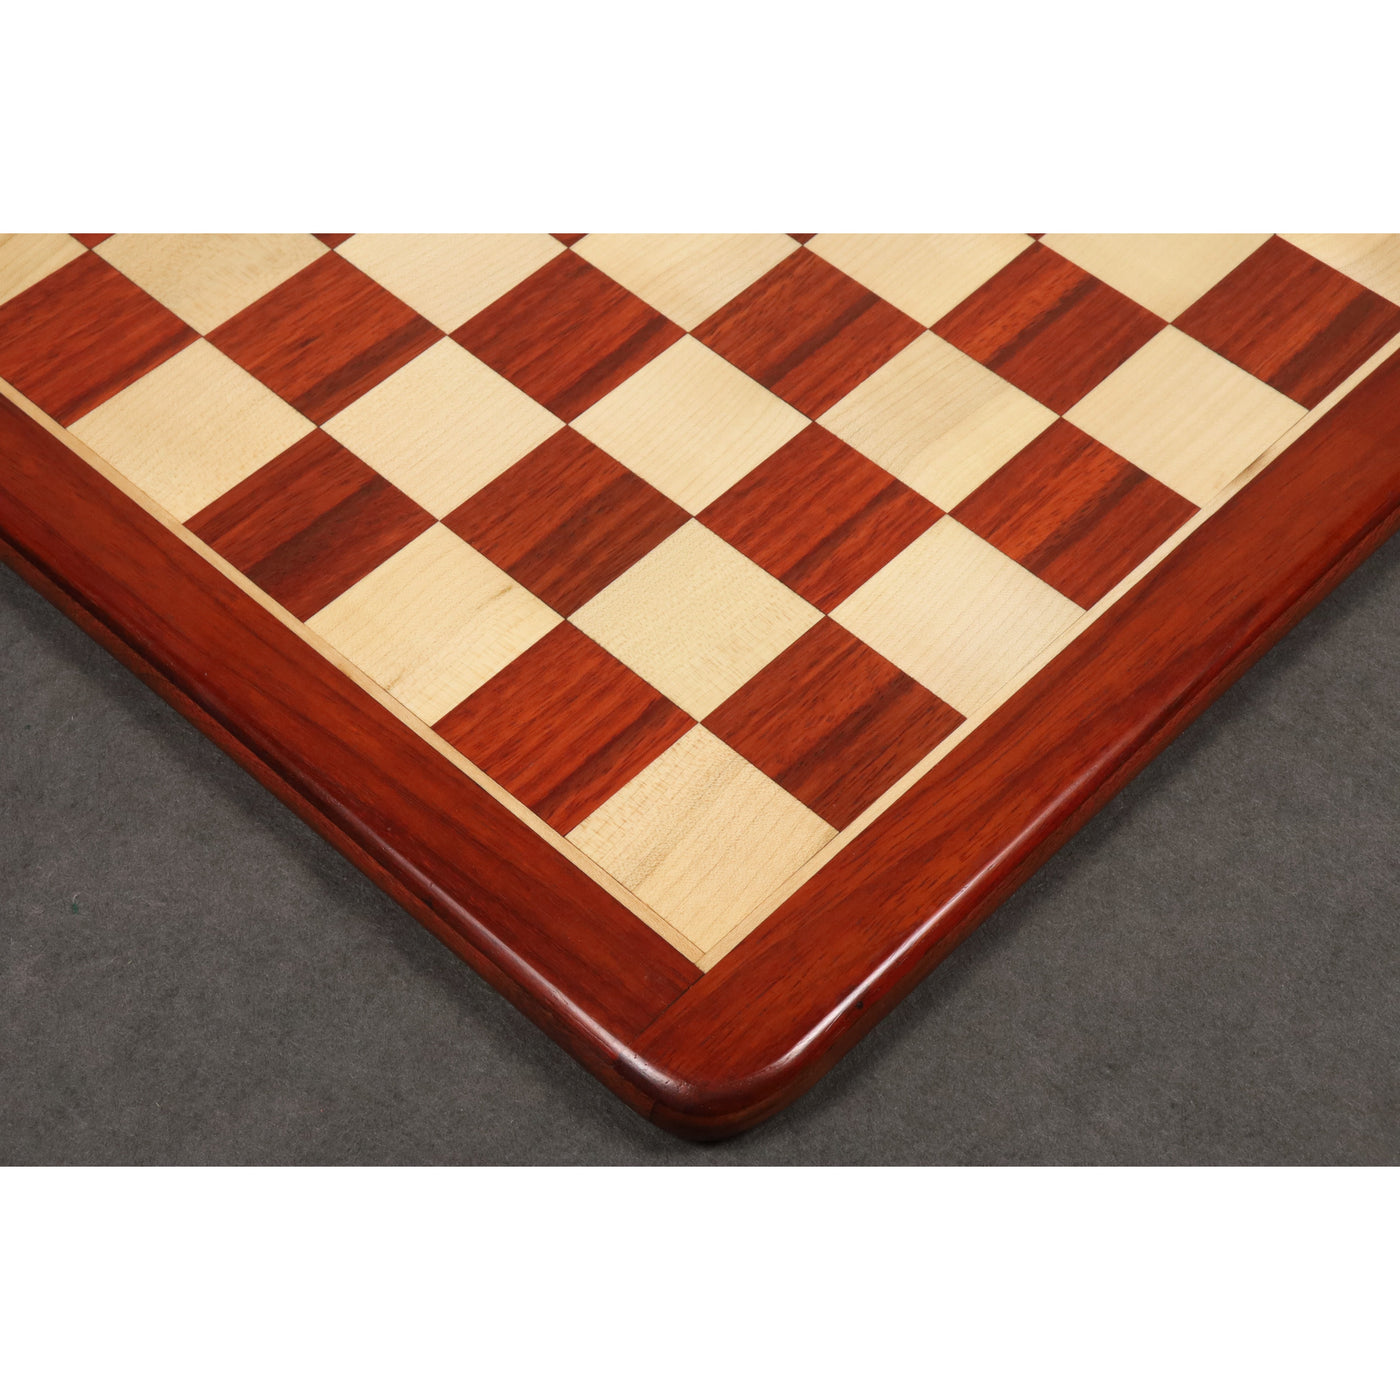 Slightly Imperfect 19" Bud Rosewood & Maple Wood Chess board